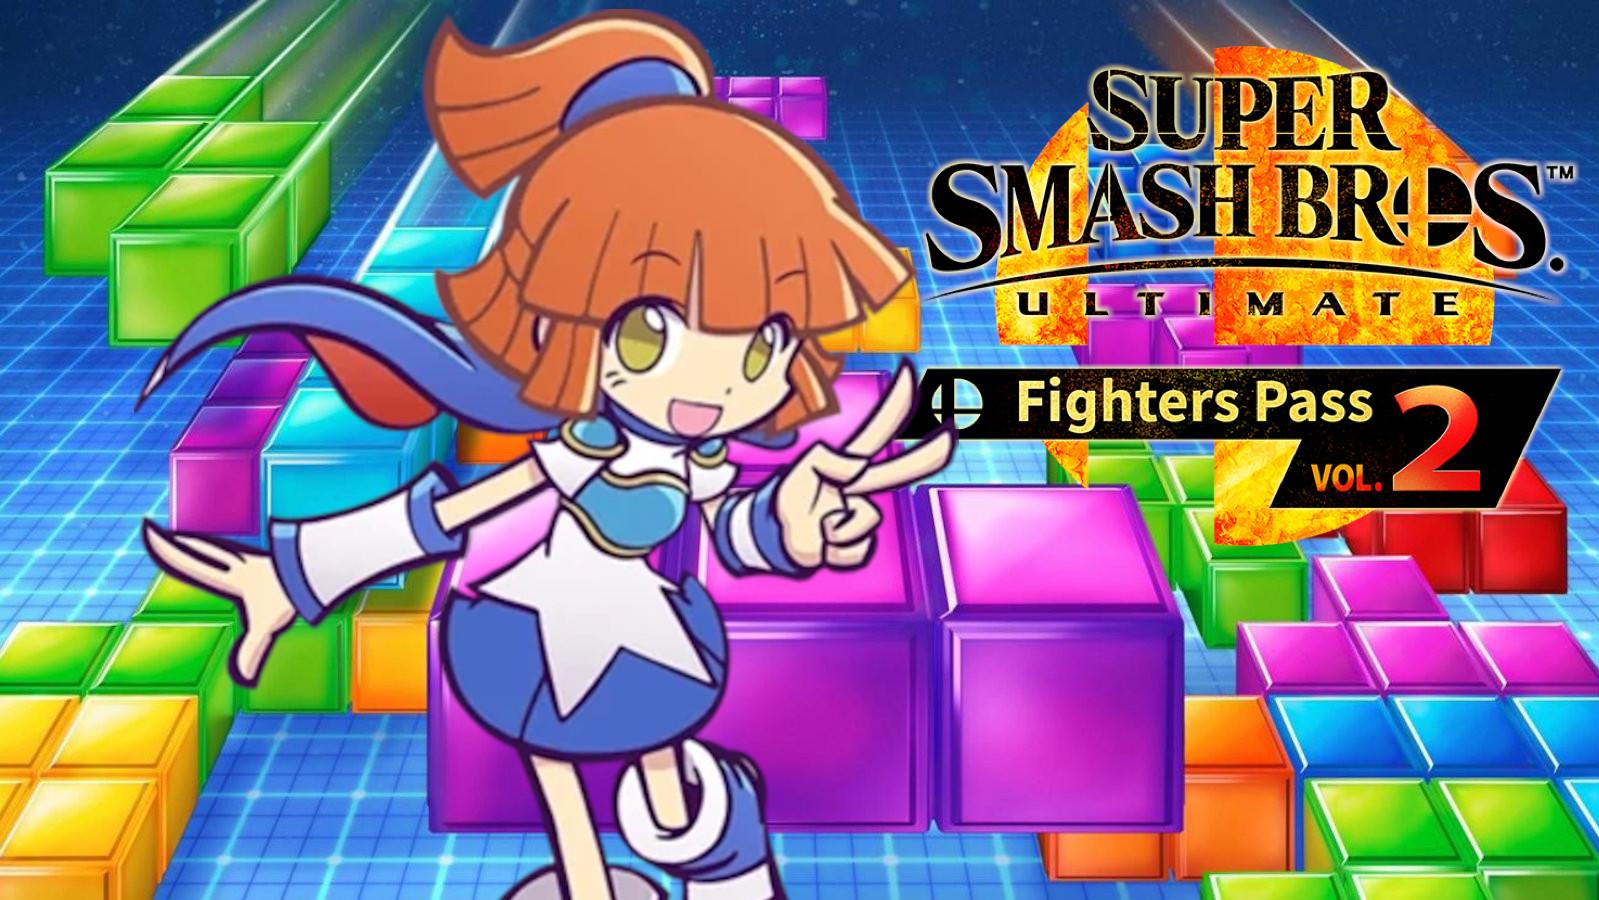 Arle from Puyo Puyo and Tetris in Smash Ultimate